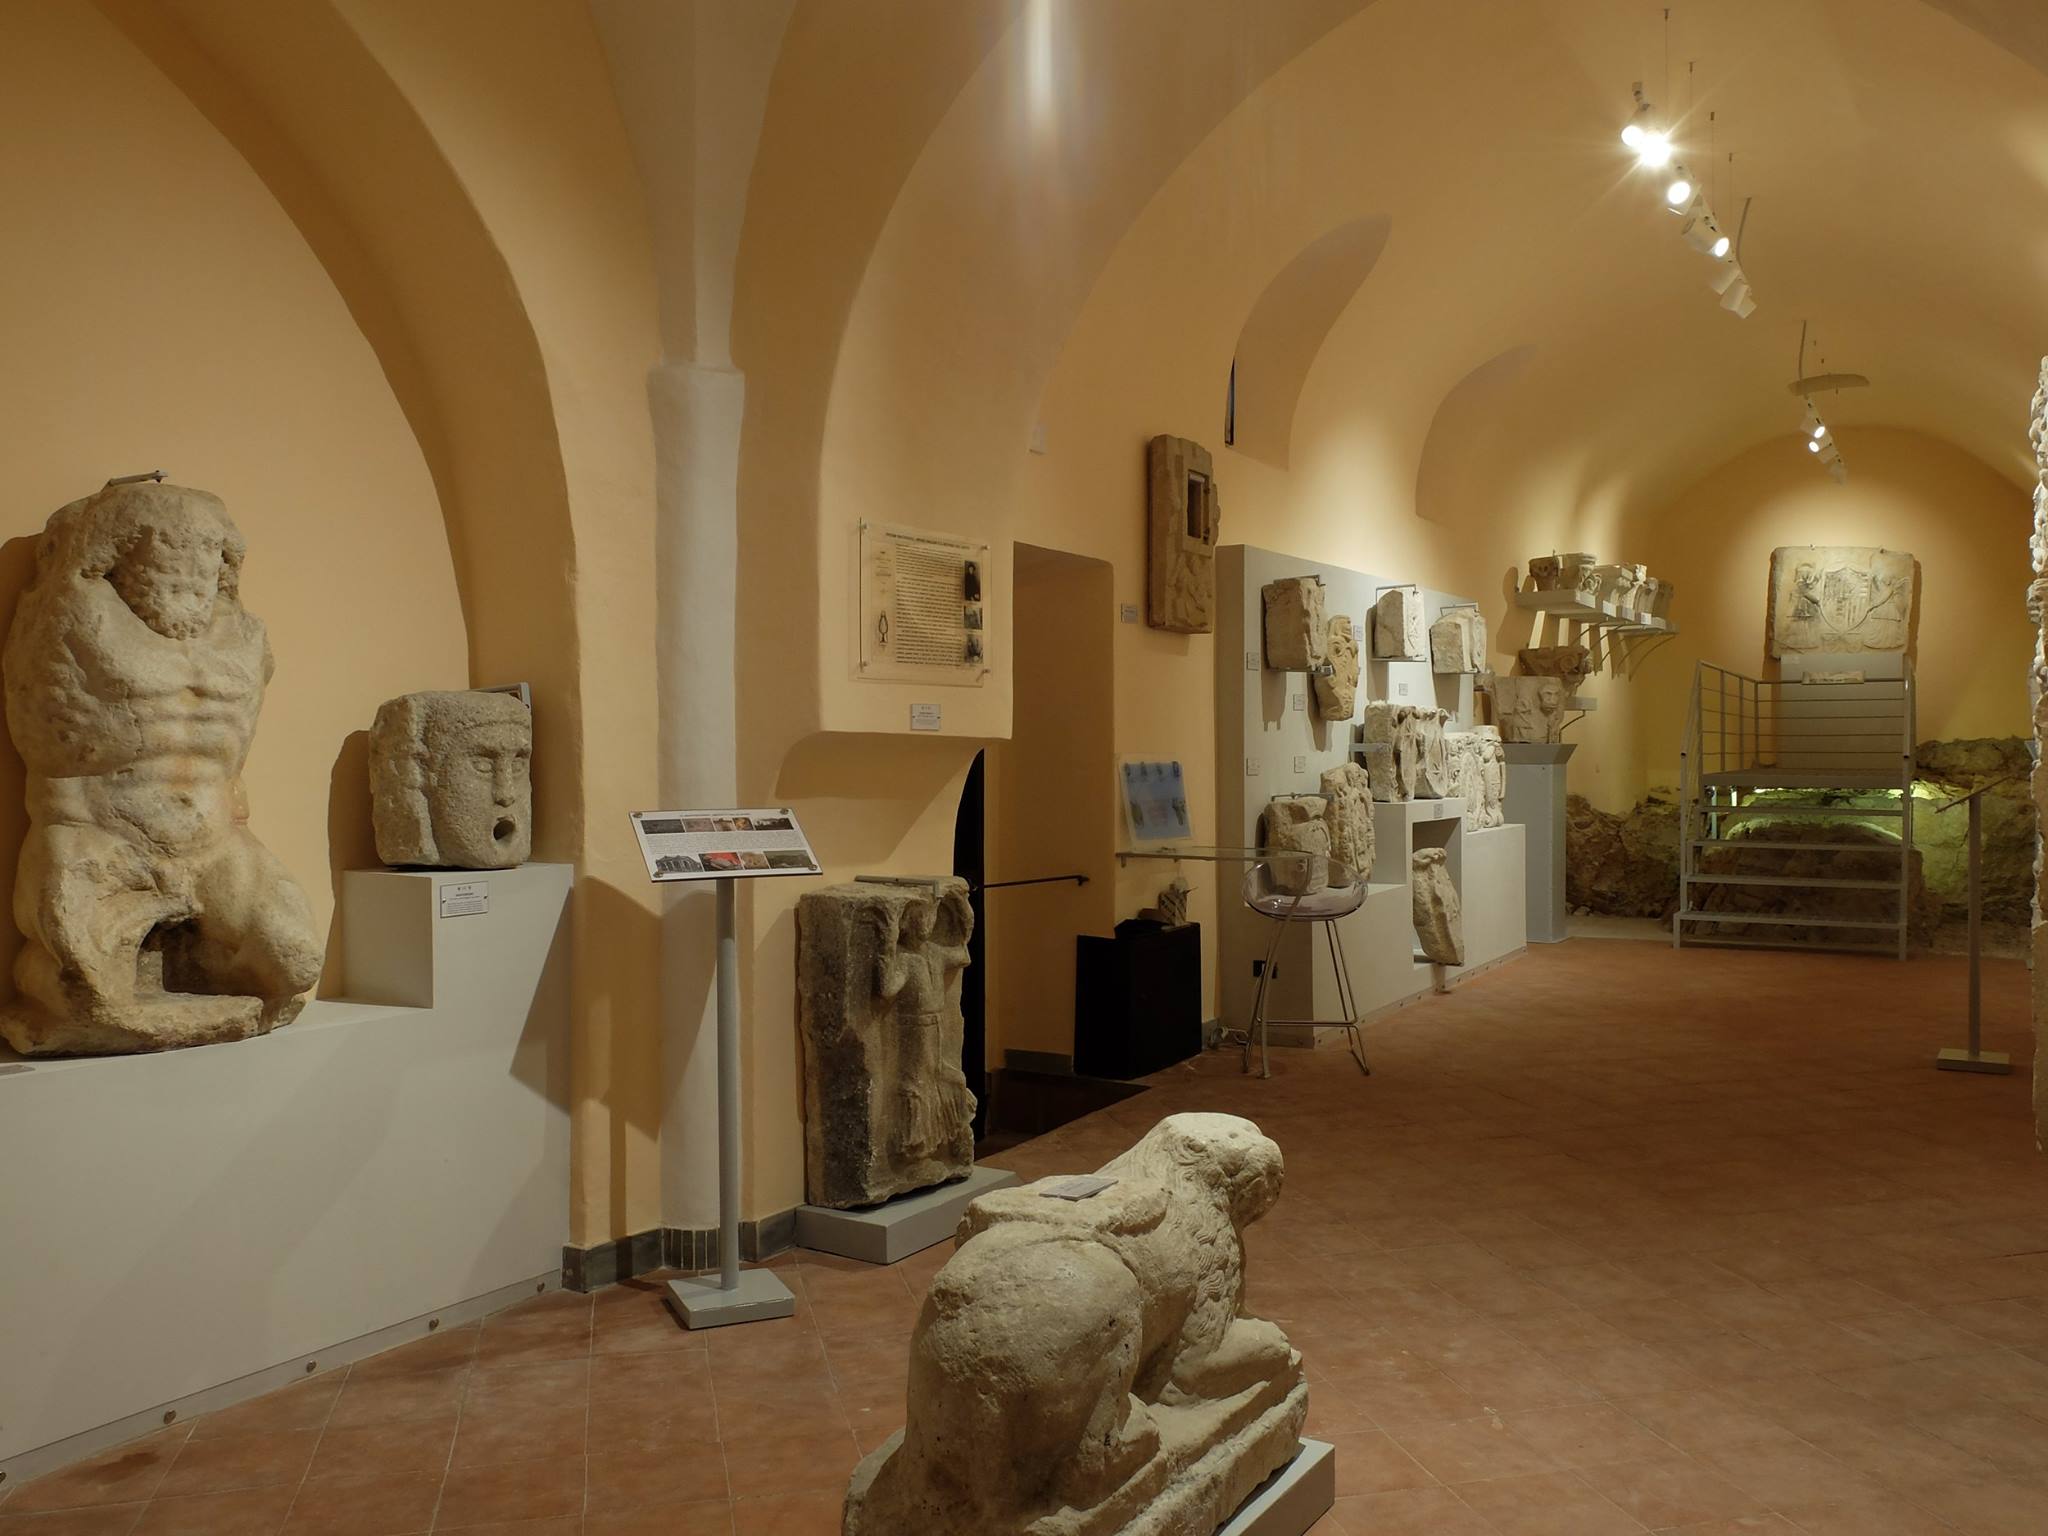 The Diocesan Museum of Teggiano